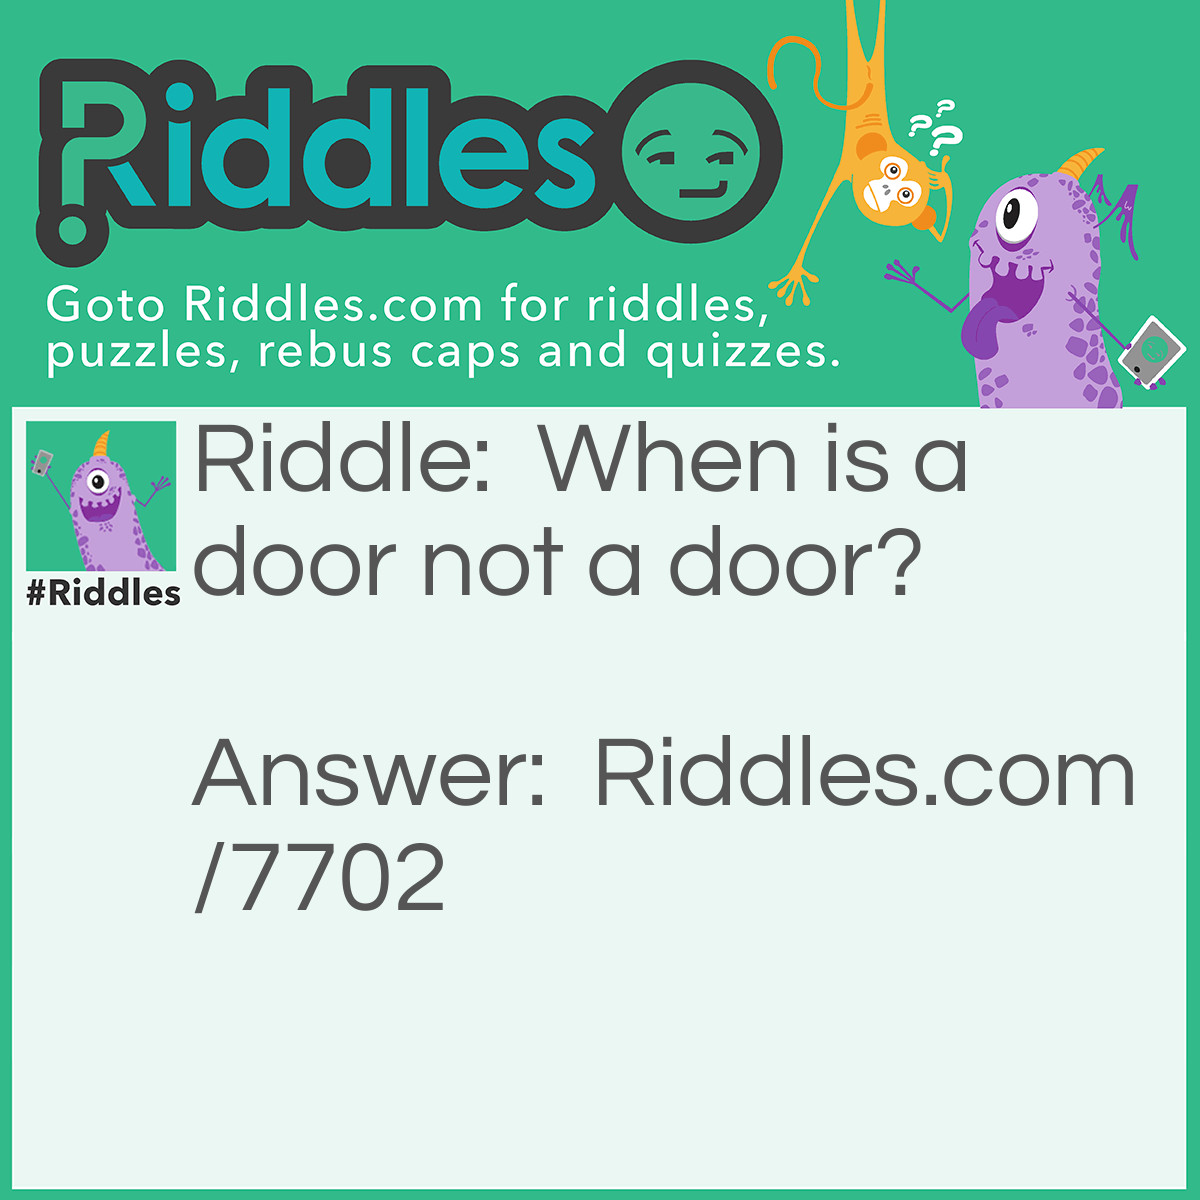 Riddle: When is a door not a door? Answer: When it's ajar. Sorry if this is not good.